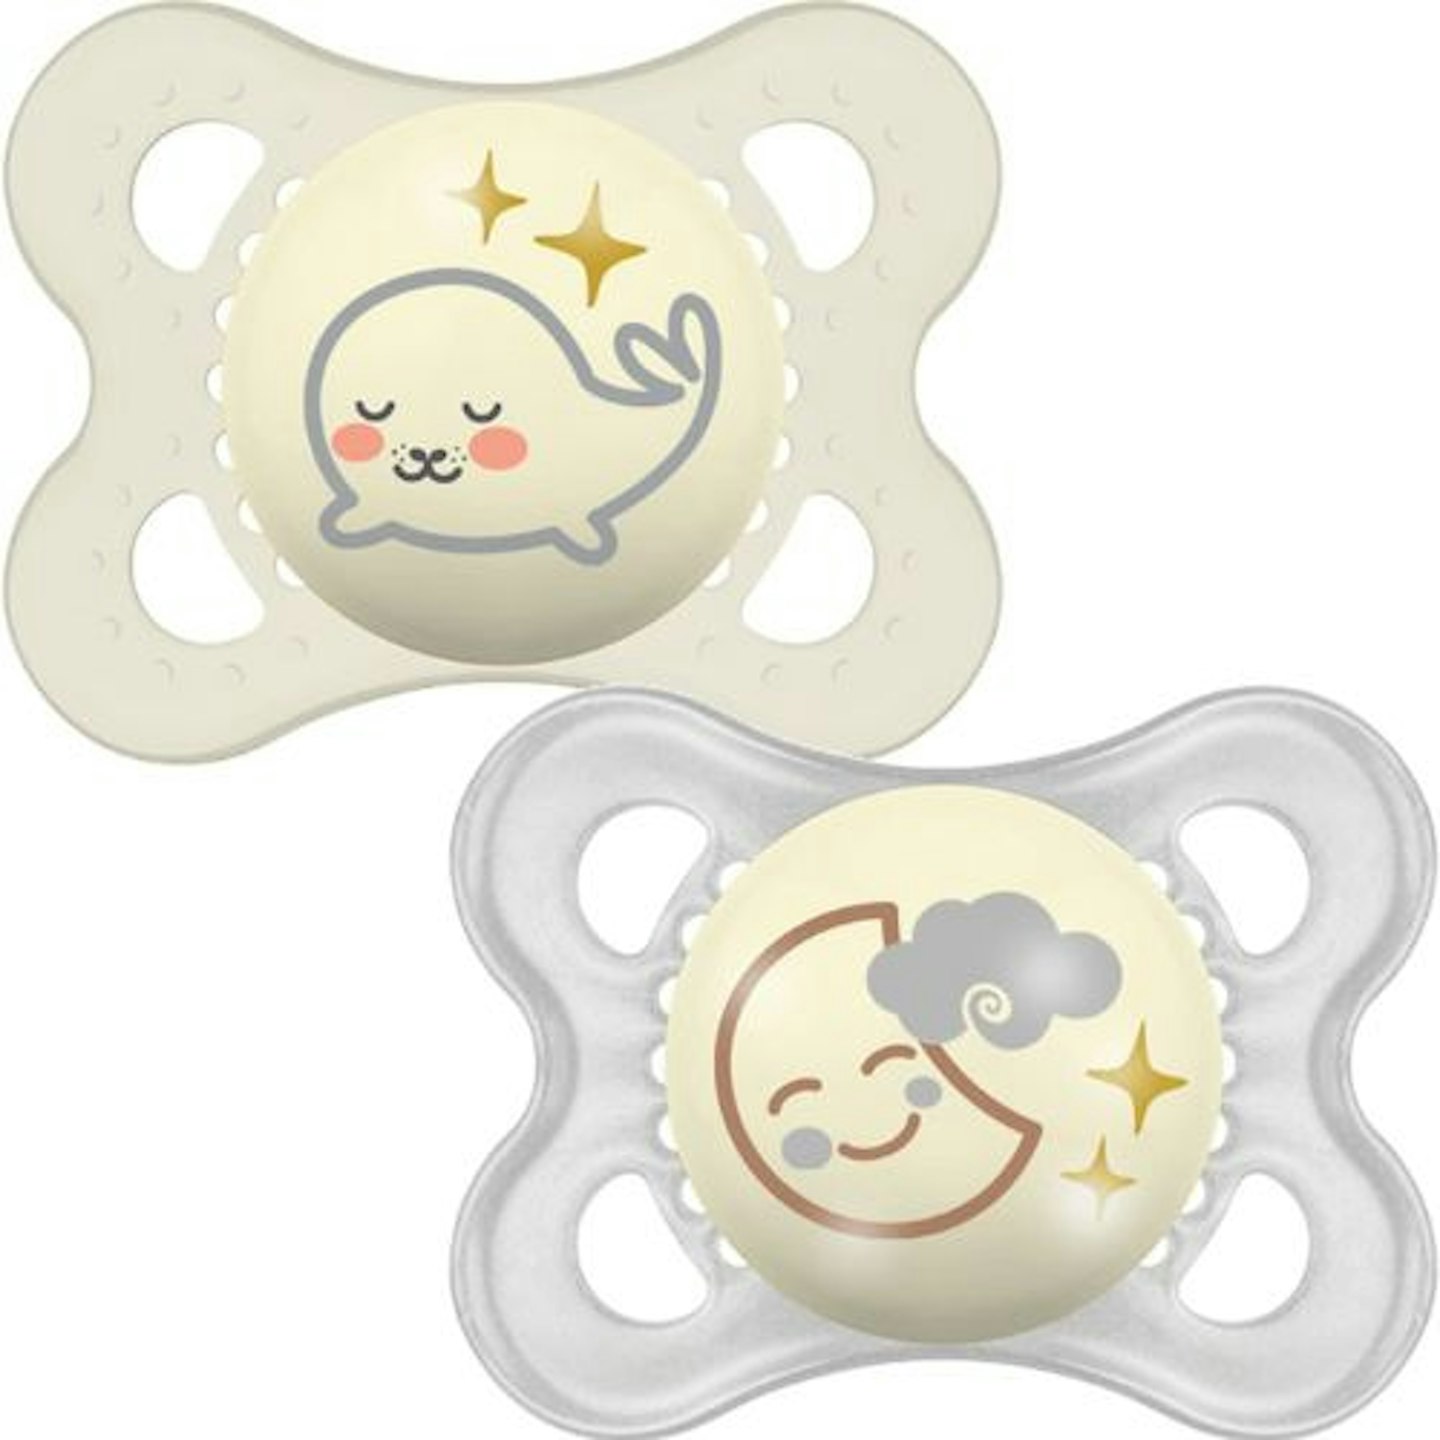 https://images.bauerhosting.com/affiliates/sites/12/2023/01/MAM-Night-Soothers-0-Months-Pack-of-2.jpg?auto=format&w=1440&q=80